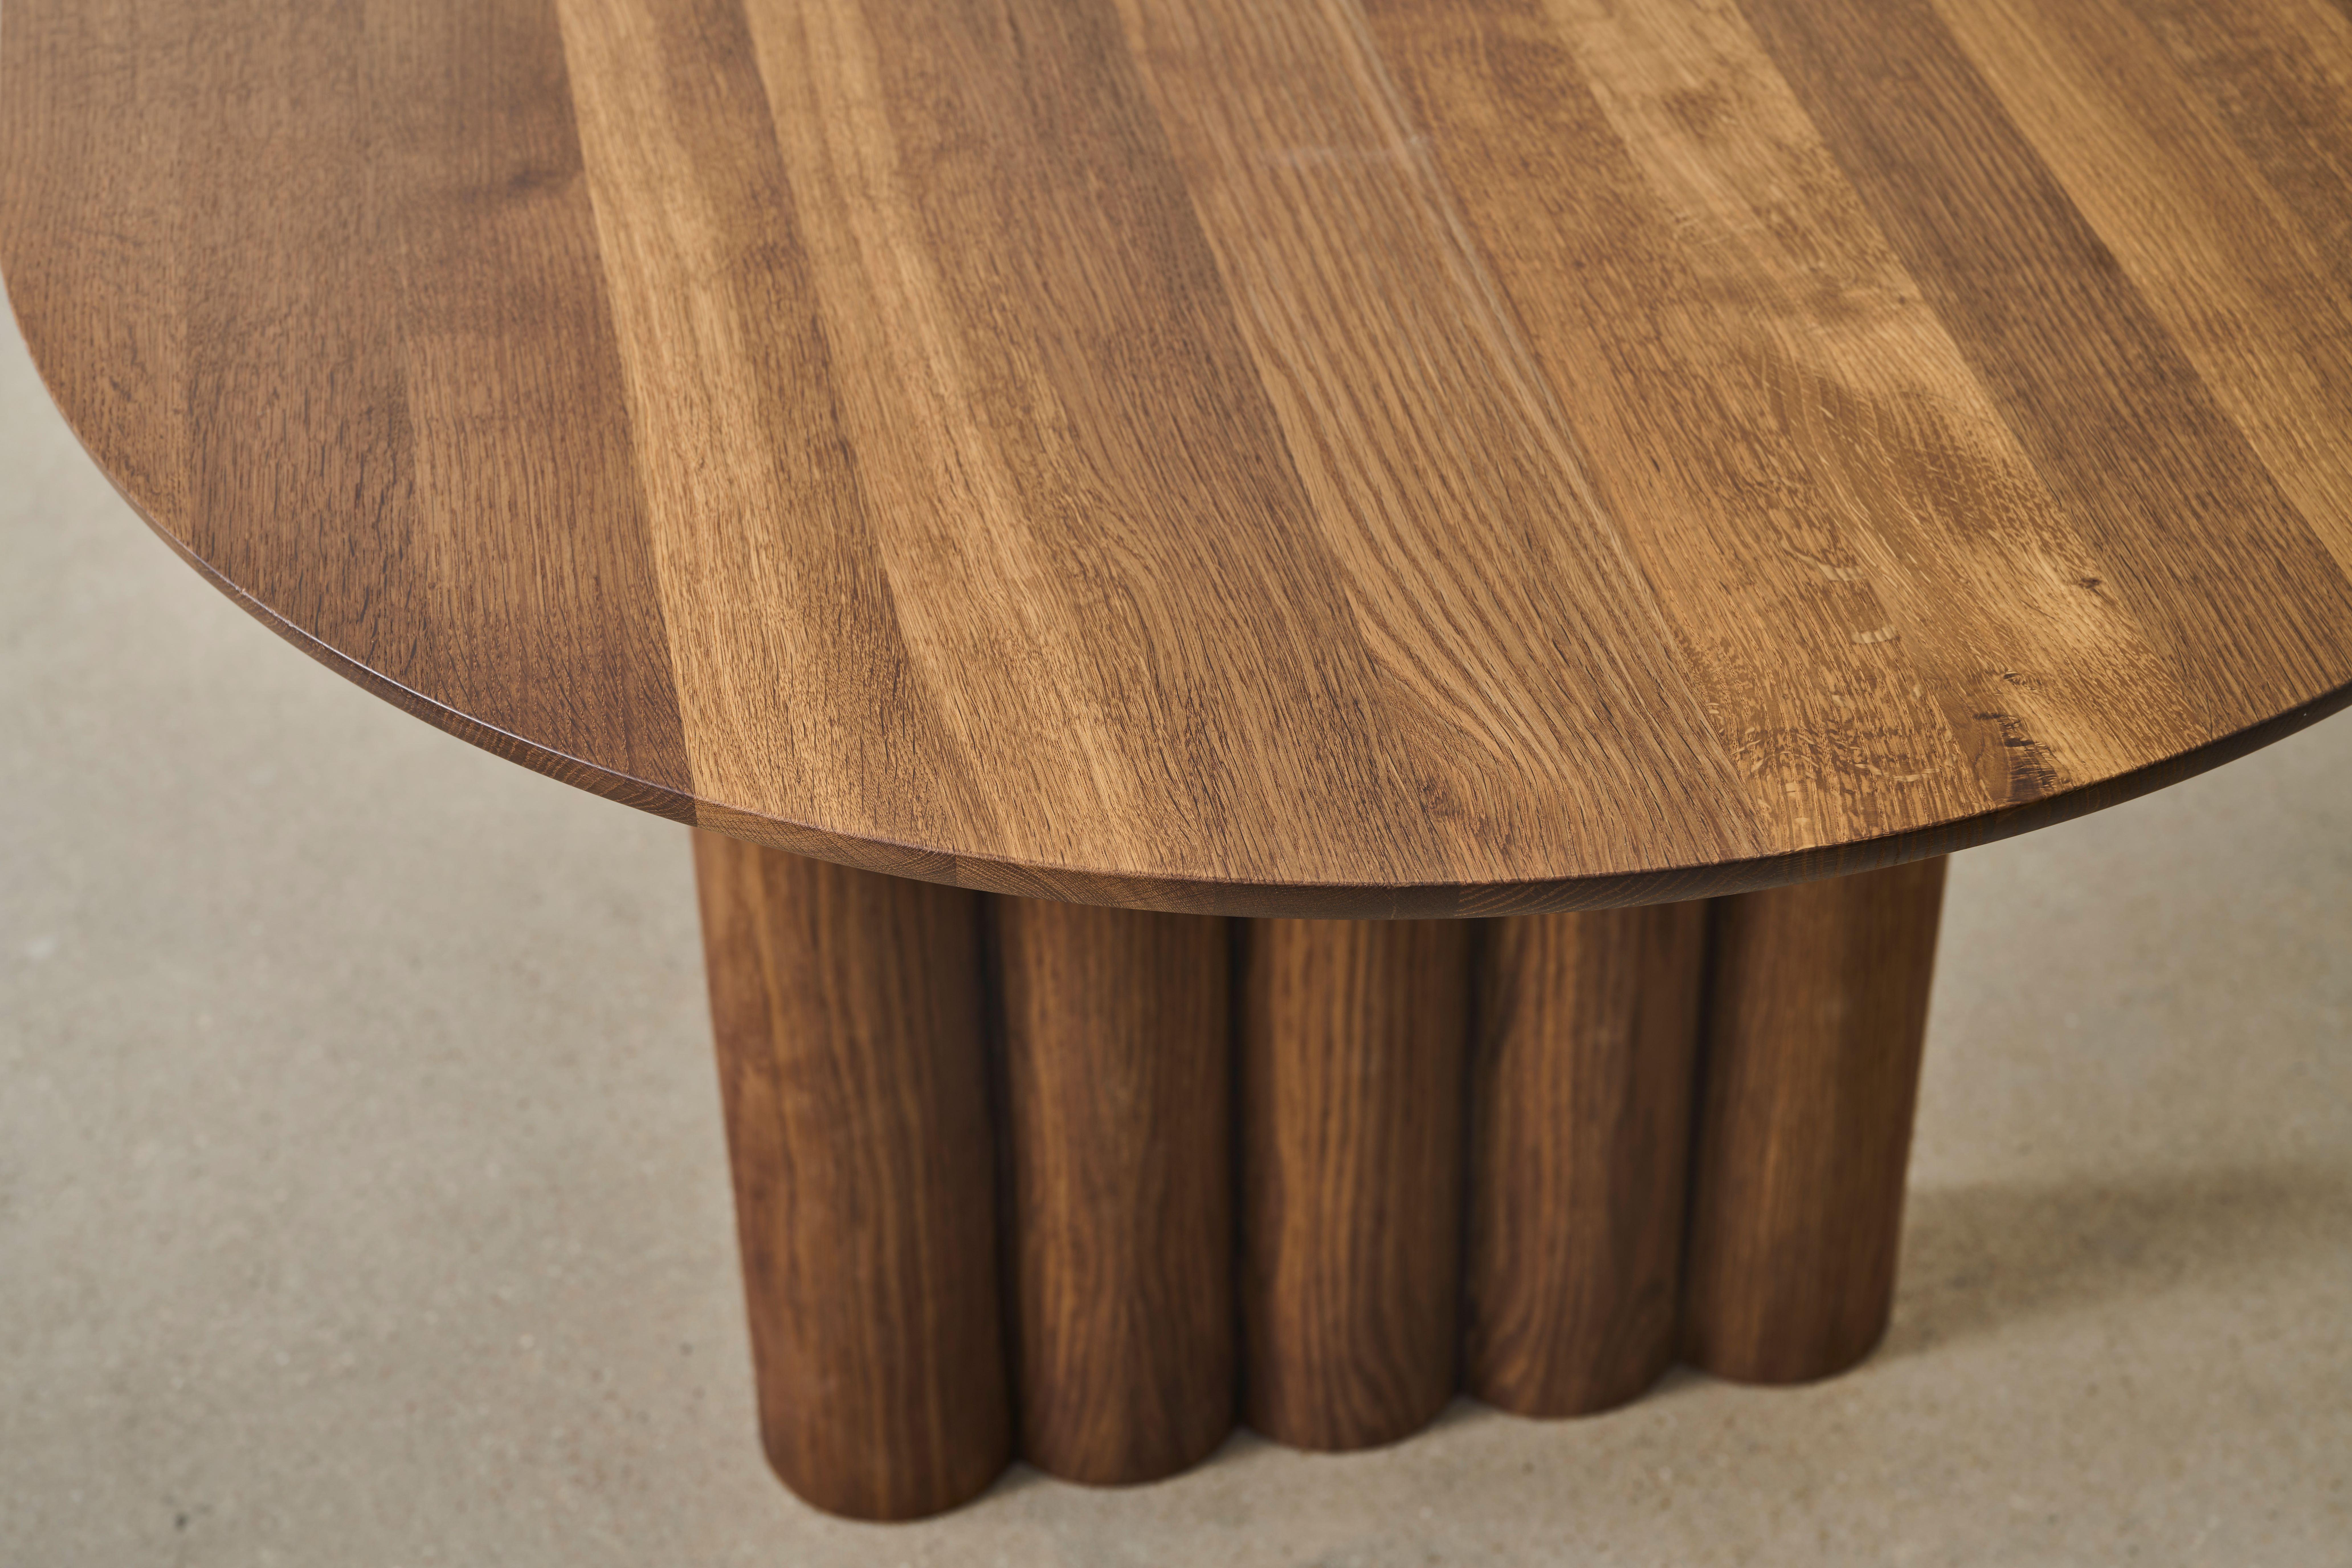 Contemporary Dining Table 'Plush' by Dk3, Smoked Oak or Walnut, 340, Rectangular In New Condition For Sale In Paris, FR